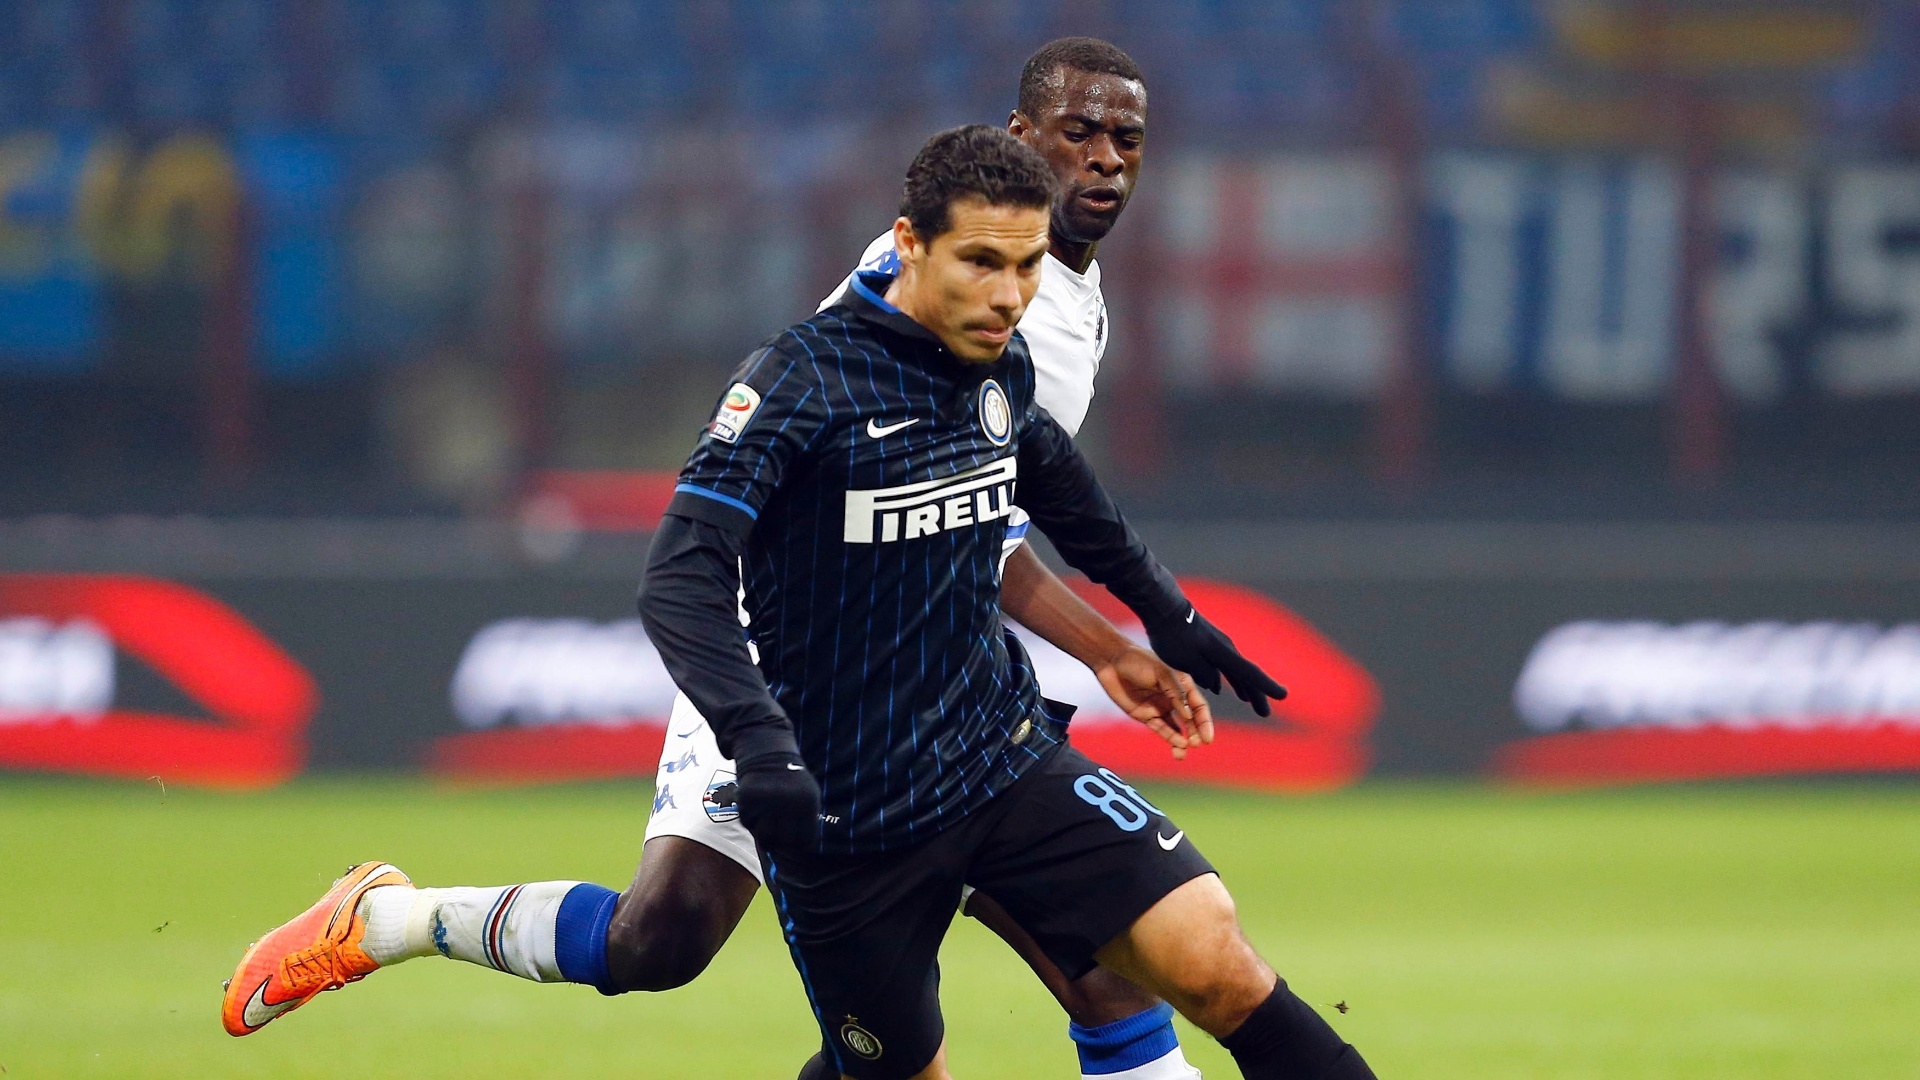 Hernanes: “We want to win as much as the fans do”